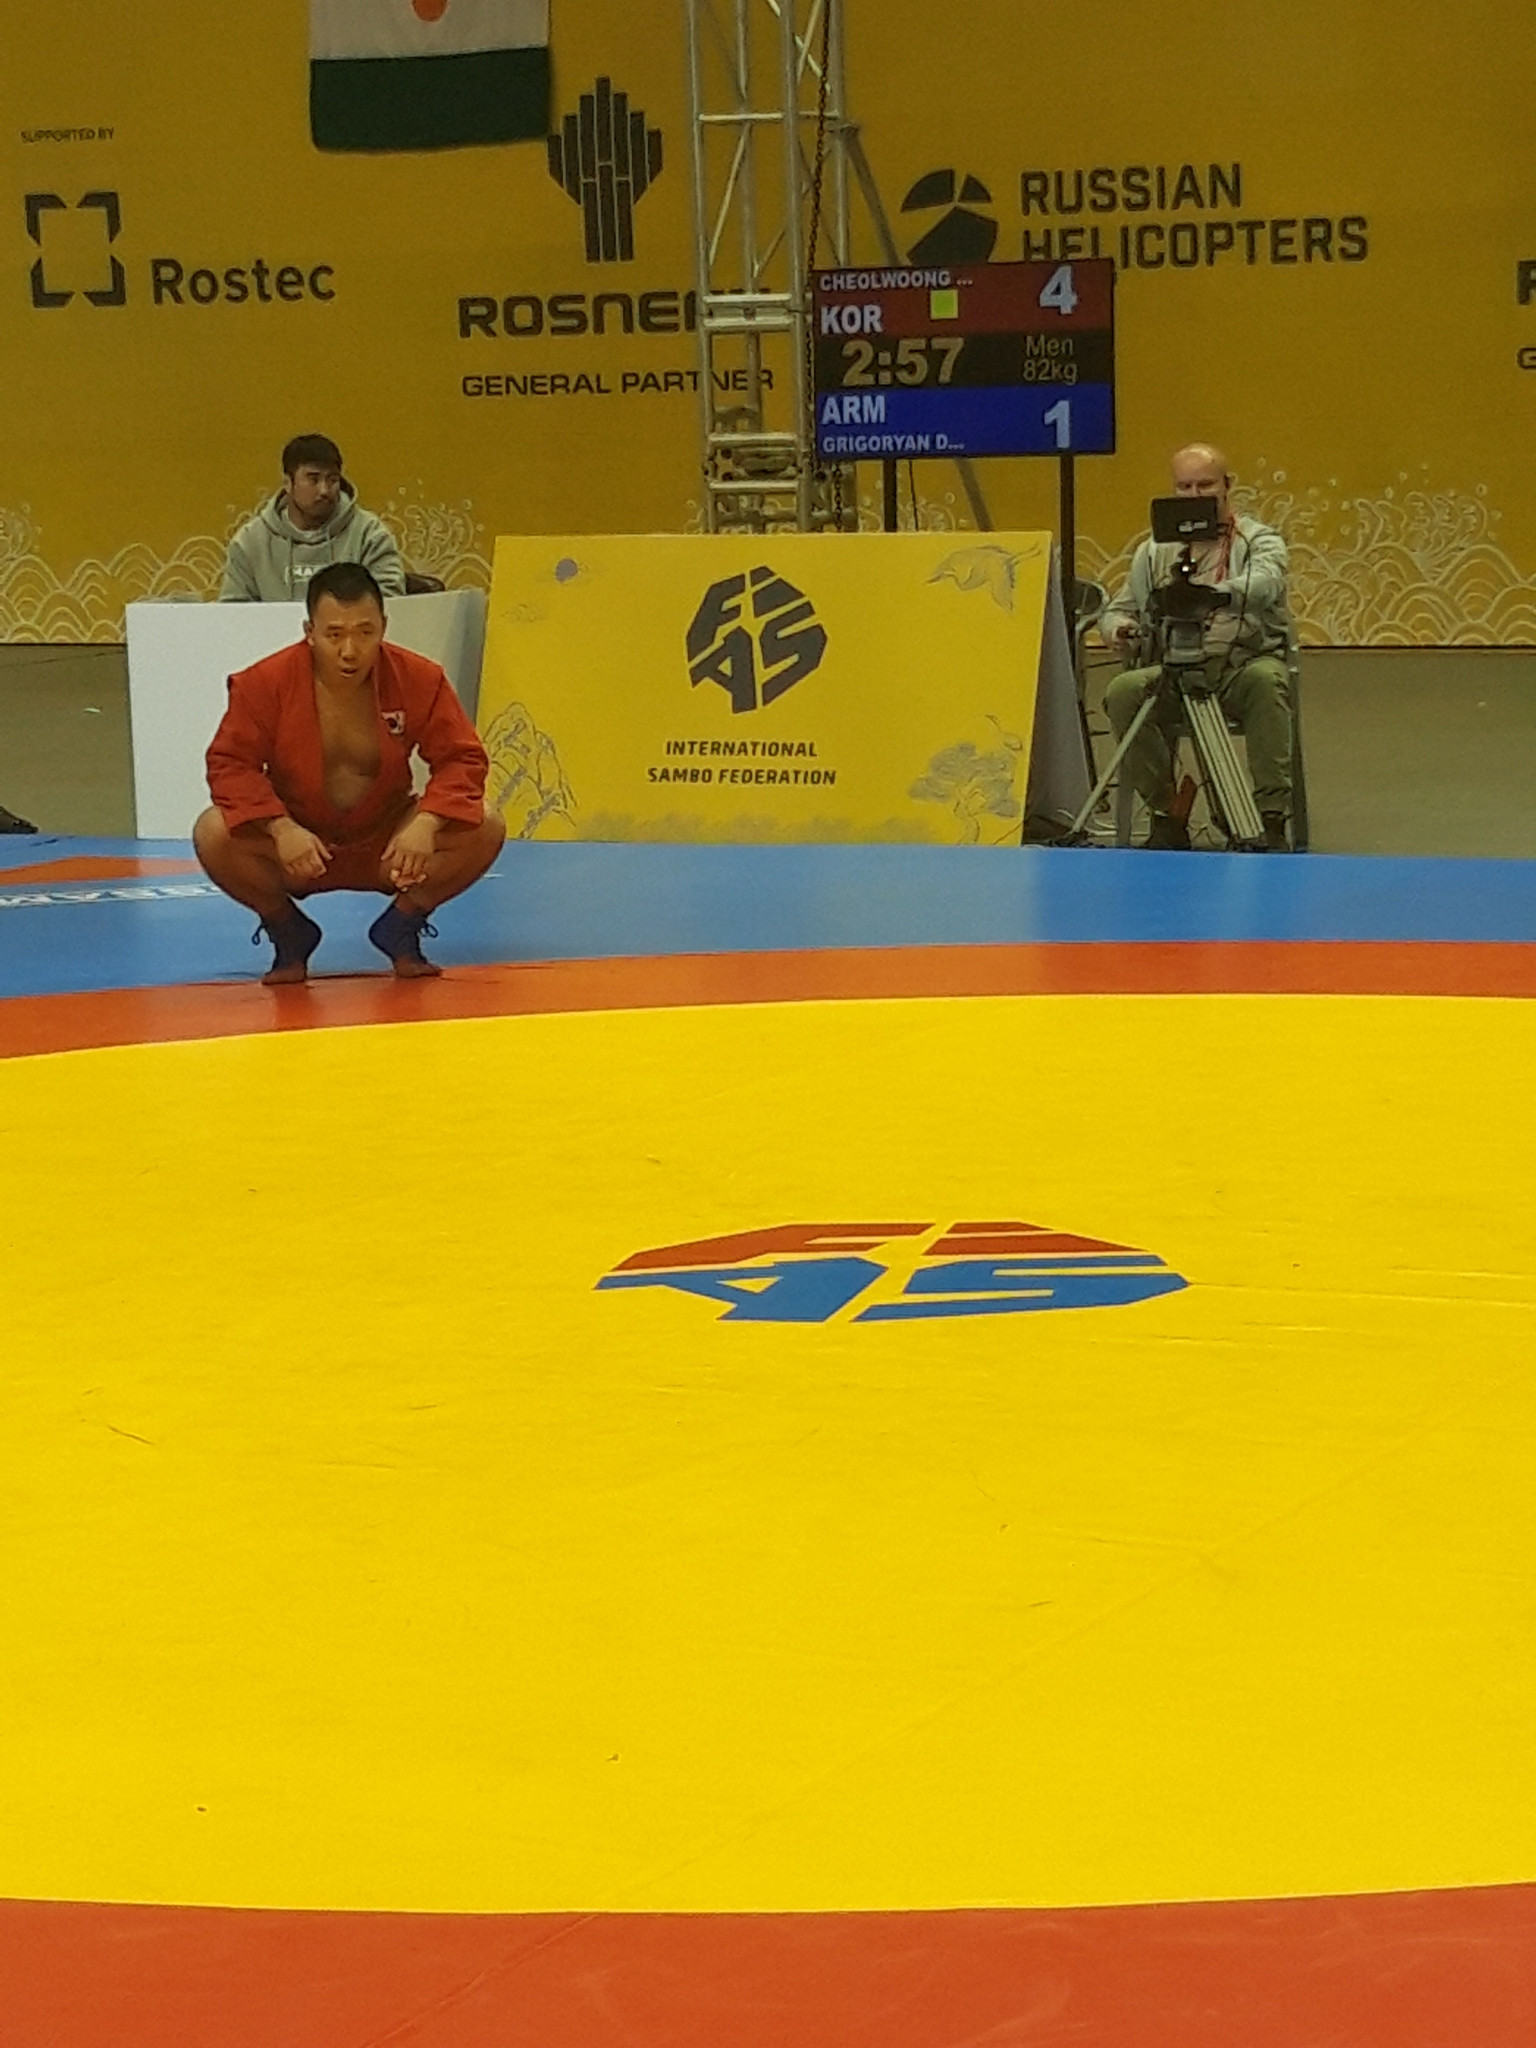 South Korean sambist Cheonwoong An awaits a refereeing call in the men's 82kg preliminary round ©ITG